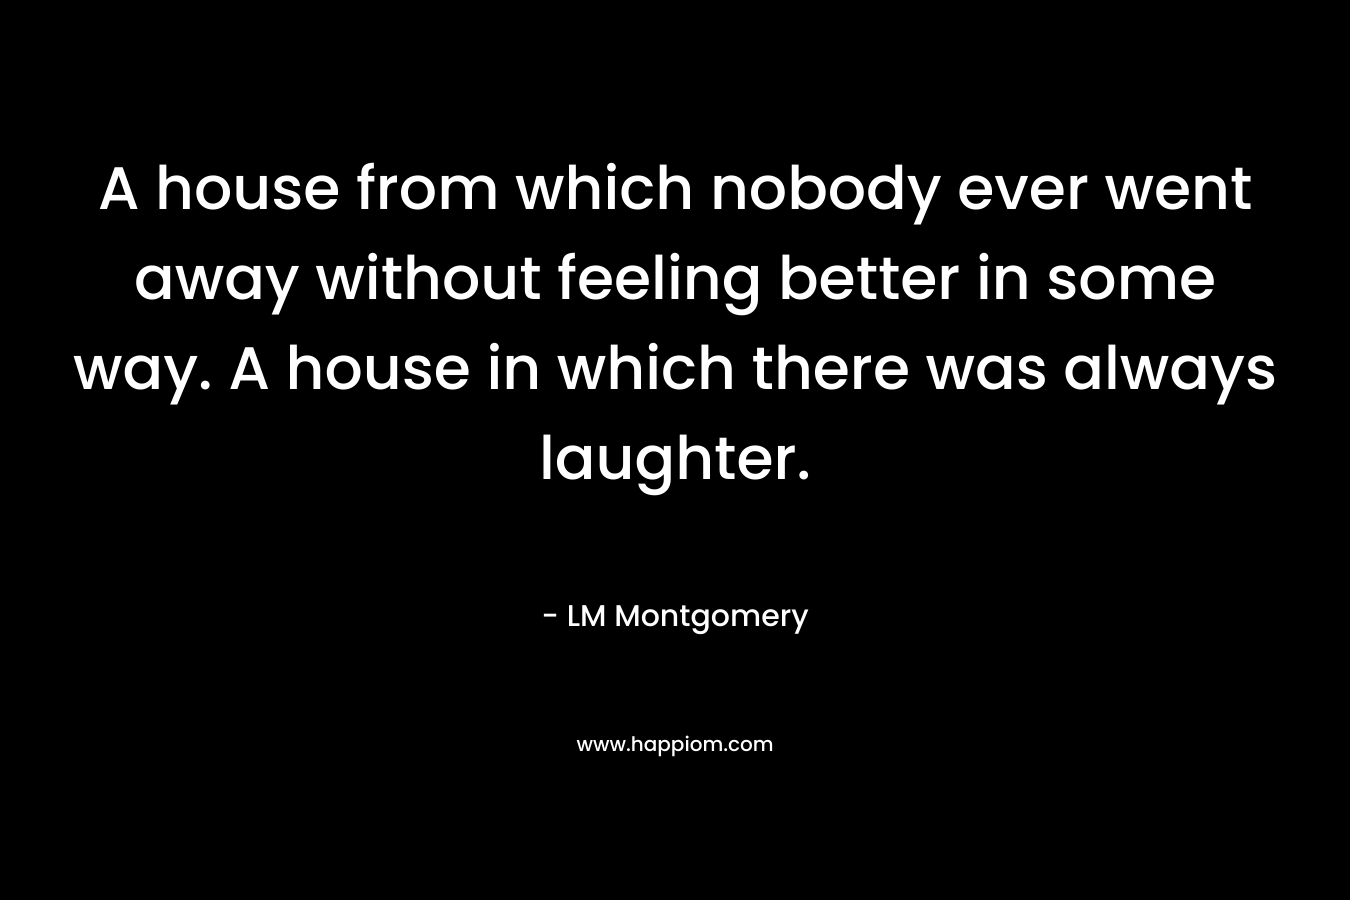 A house from which nobody ever went away without feeling better in some way. A house in which there was always laughter.